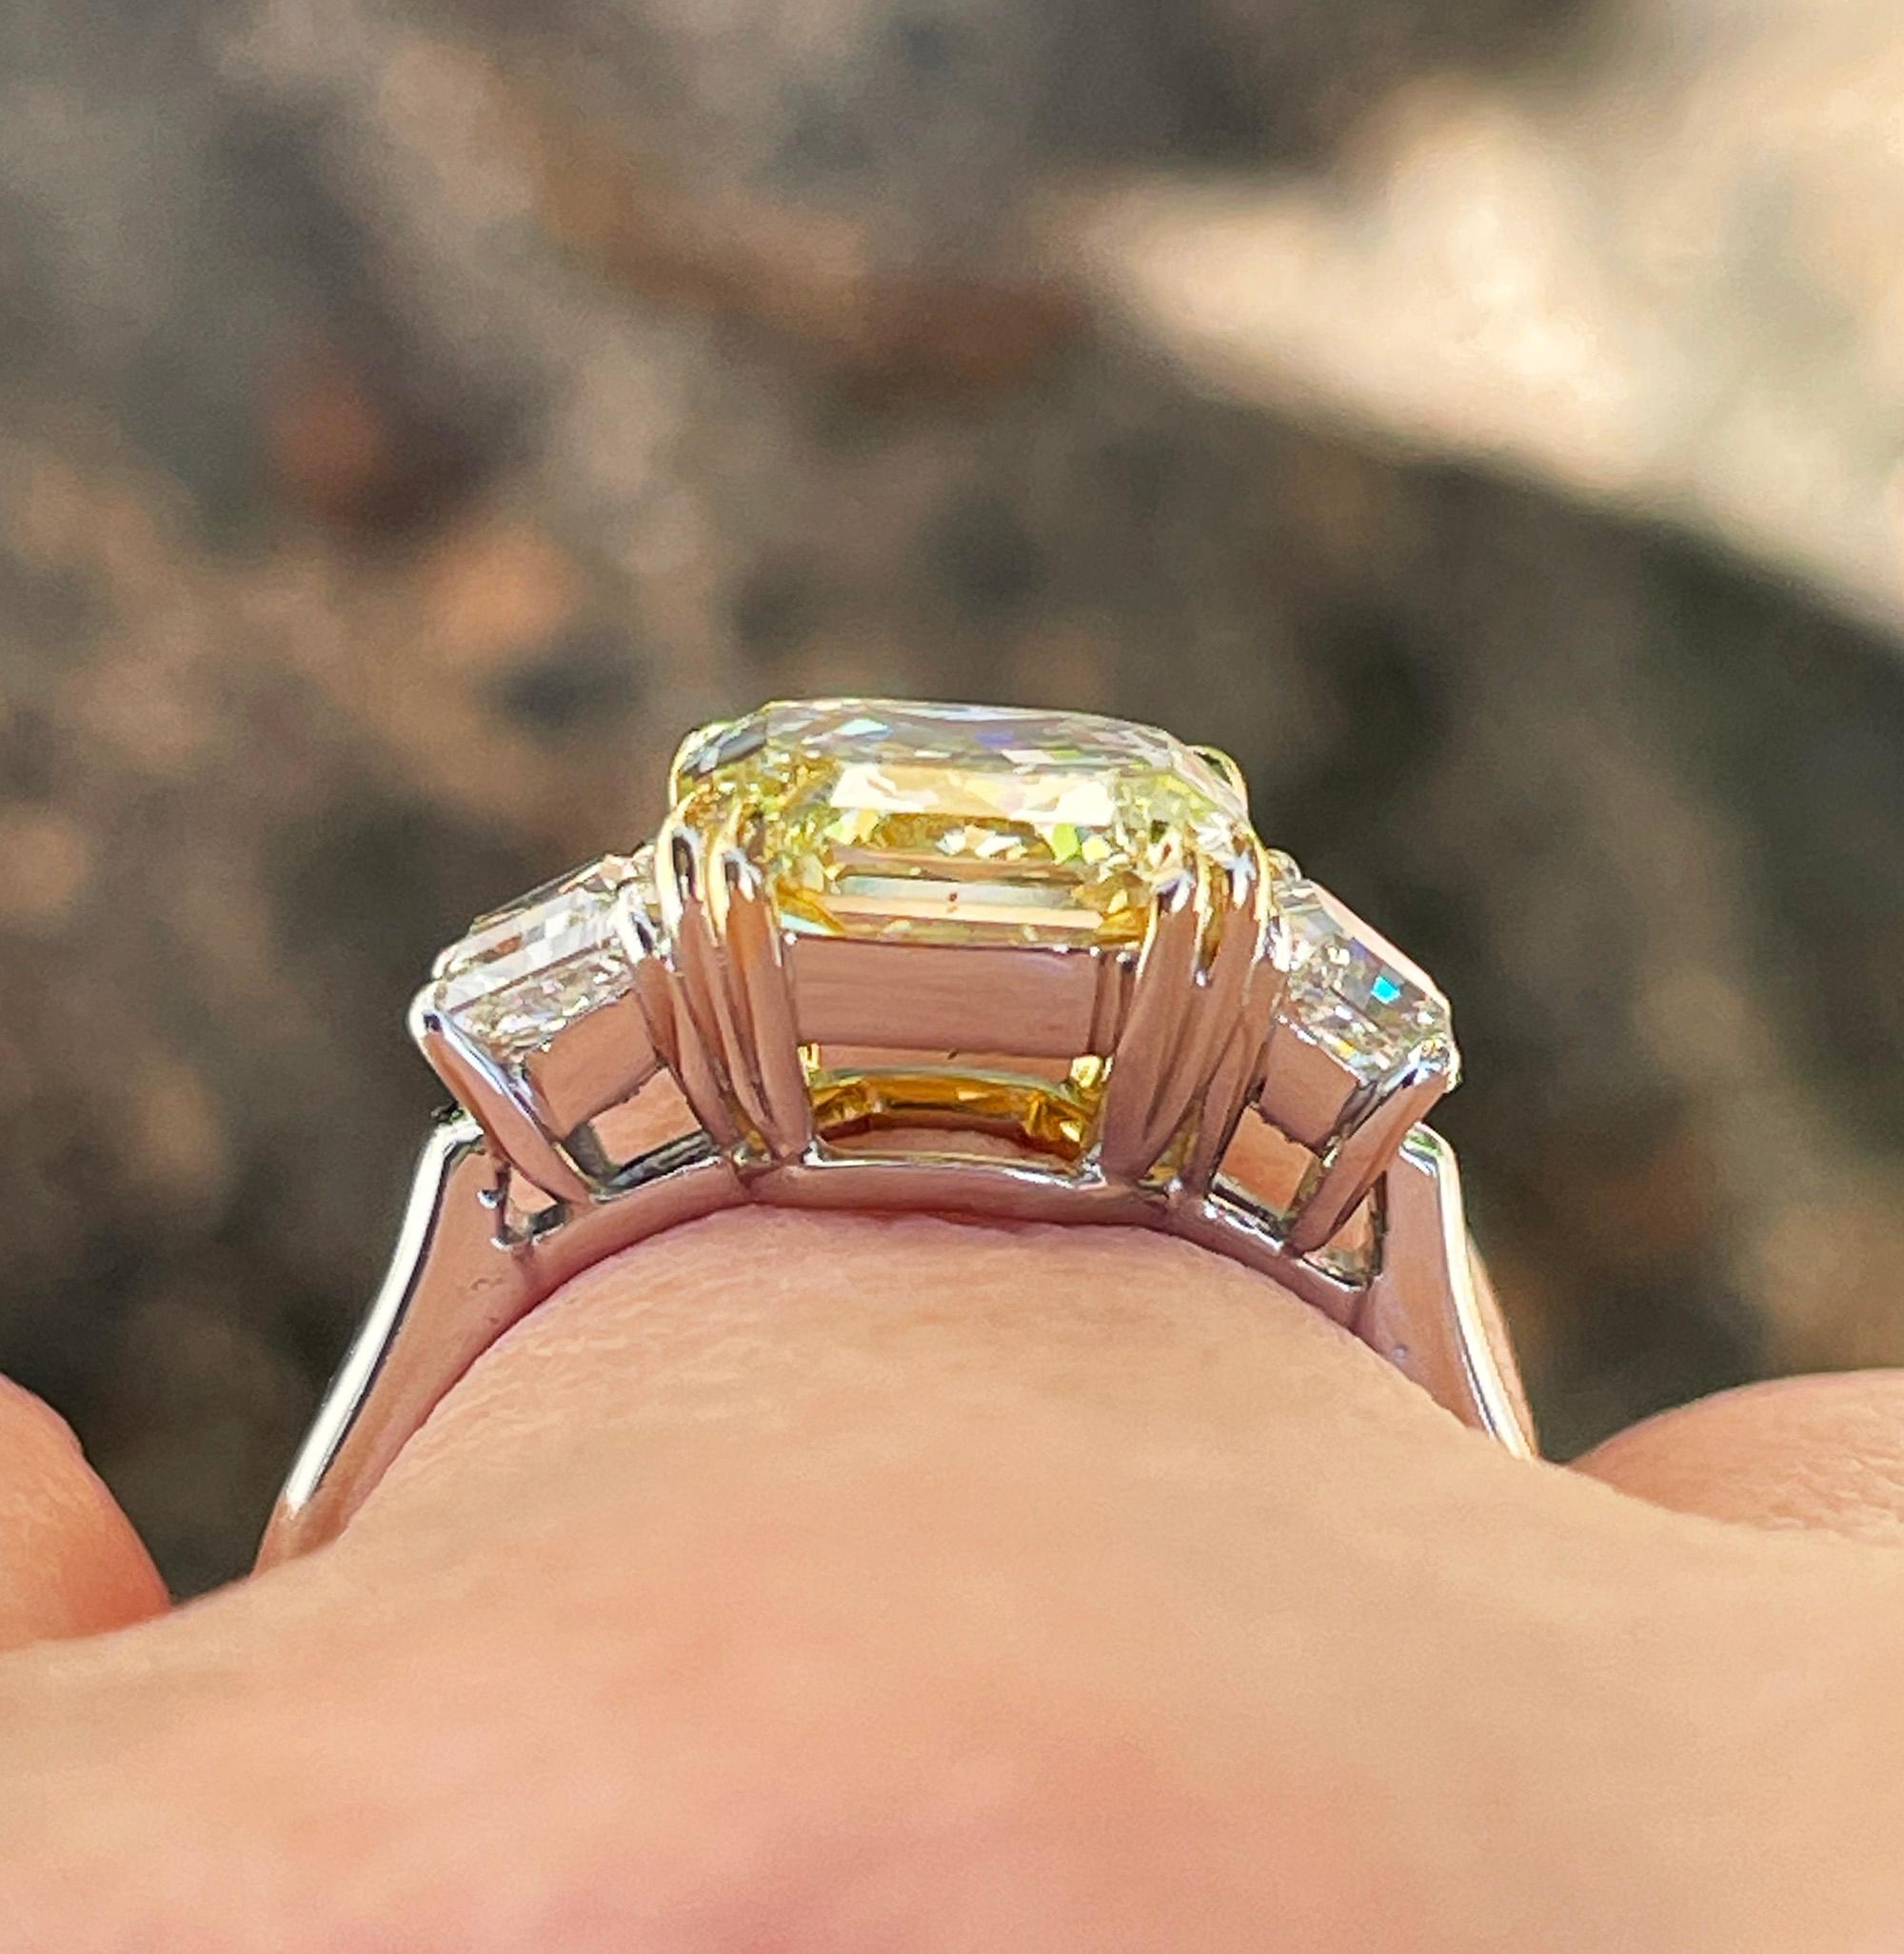 Vintage Royal Asscher GIA 4.32ctw Natural Fancy YELLOW Radiant Cut Diamond Ring For Sale 8